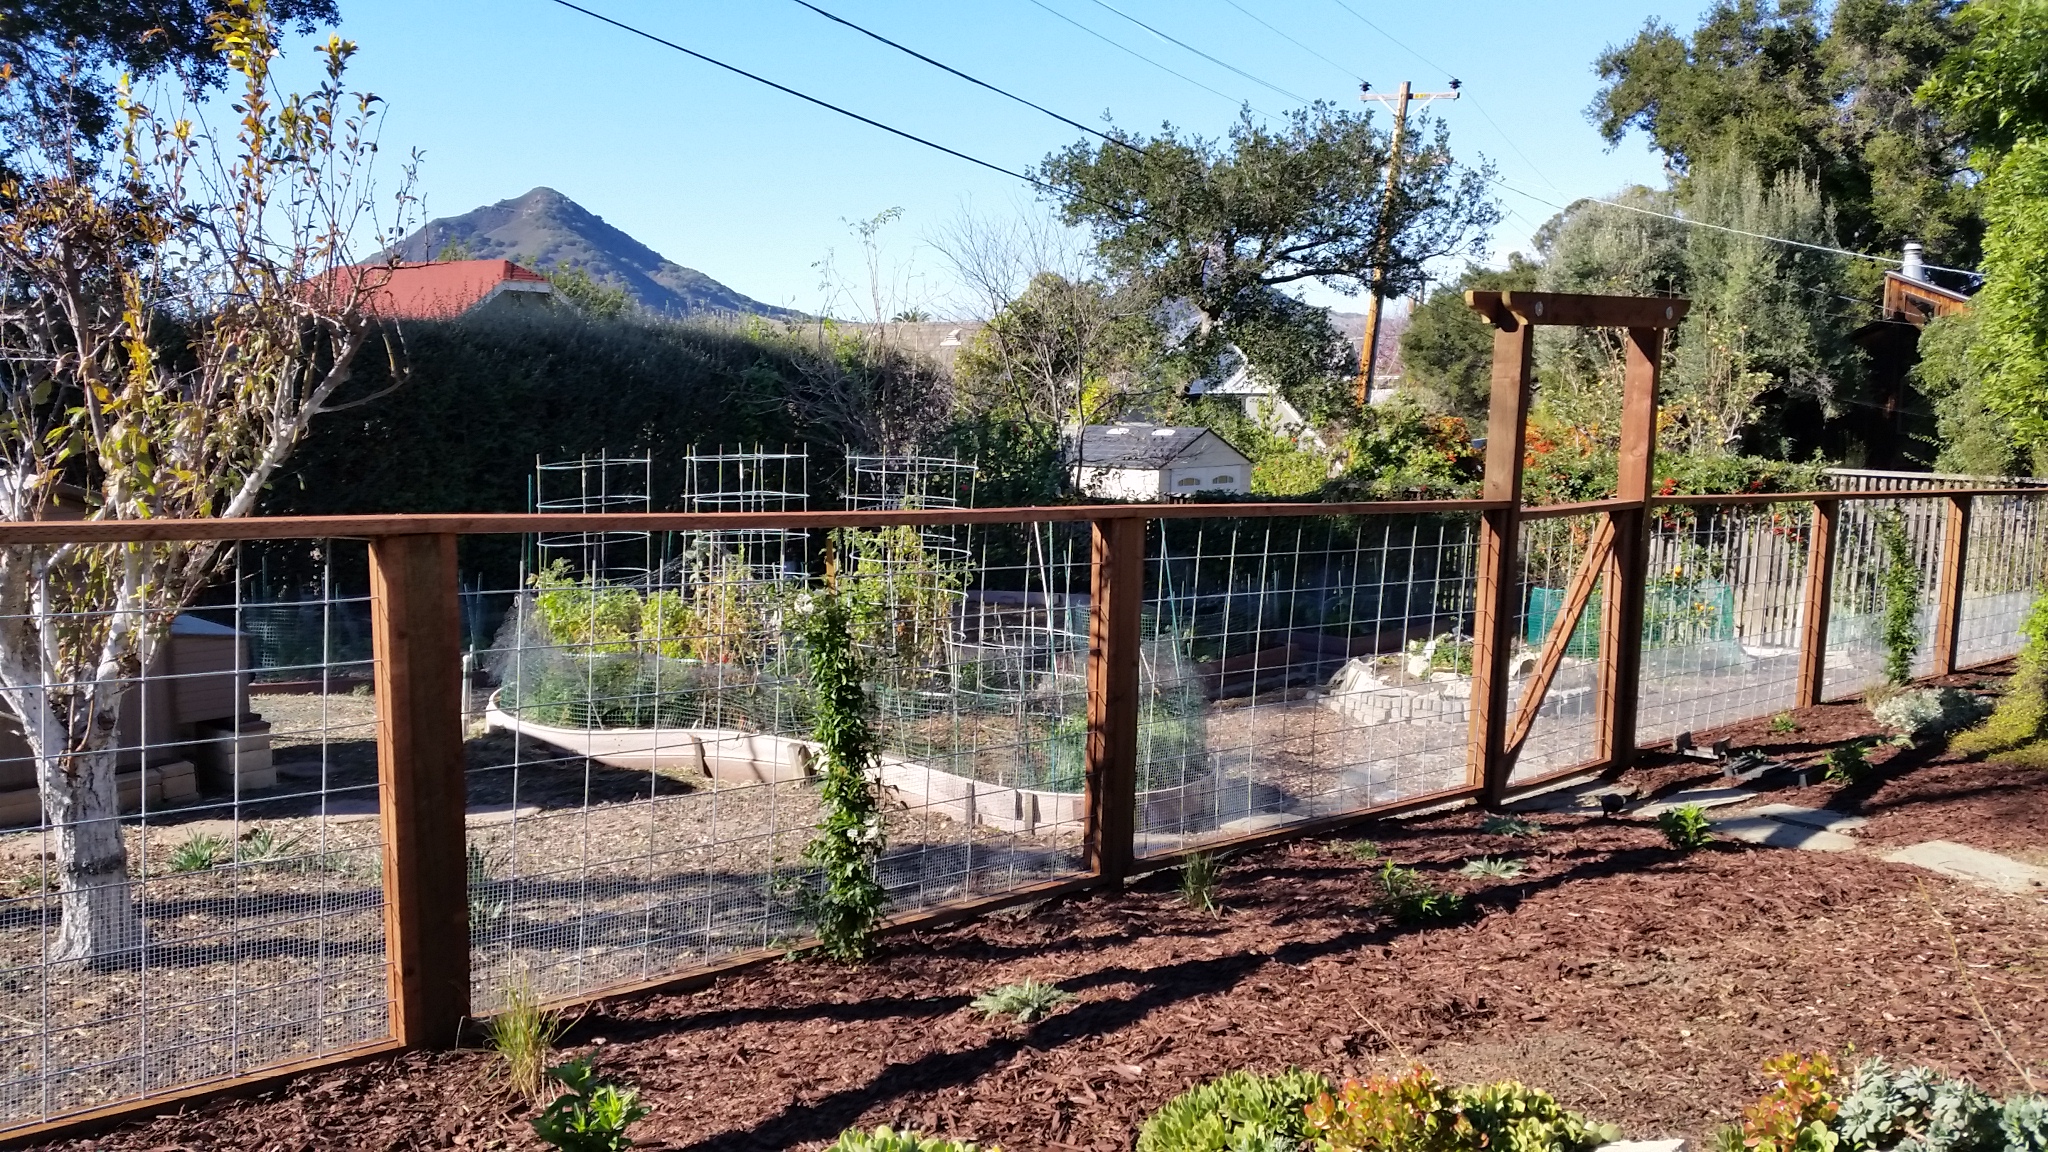  This simple fenceline design was made to corral the chickens but keep an open view into the back gradens. Vines were planted to fill in sections of fence along with other flowering shrubs and grasses to create a soft border between the different gar